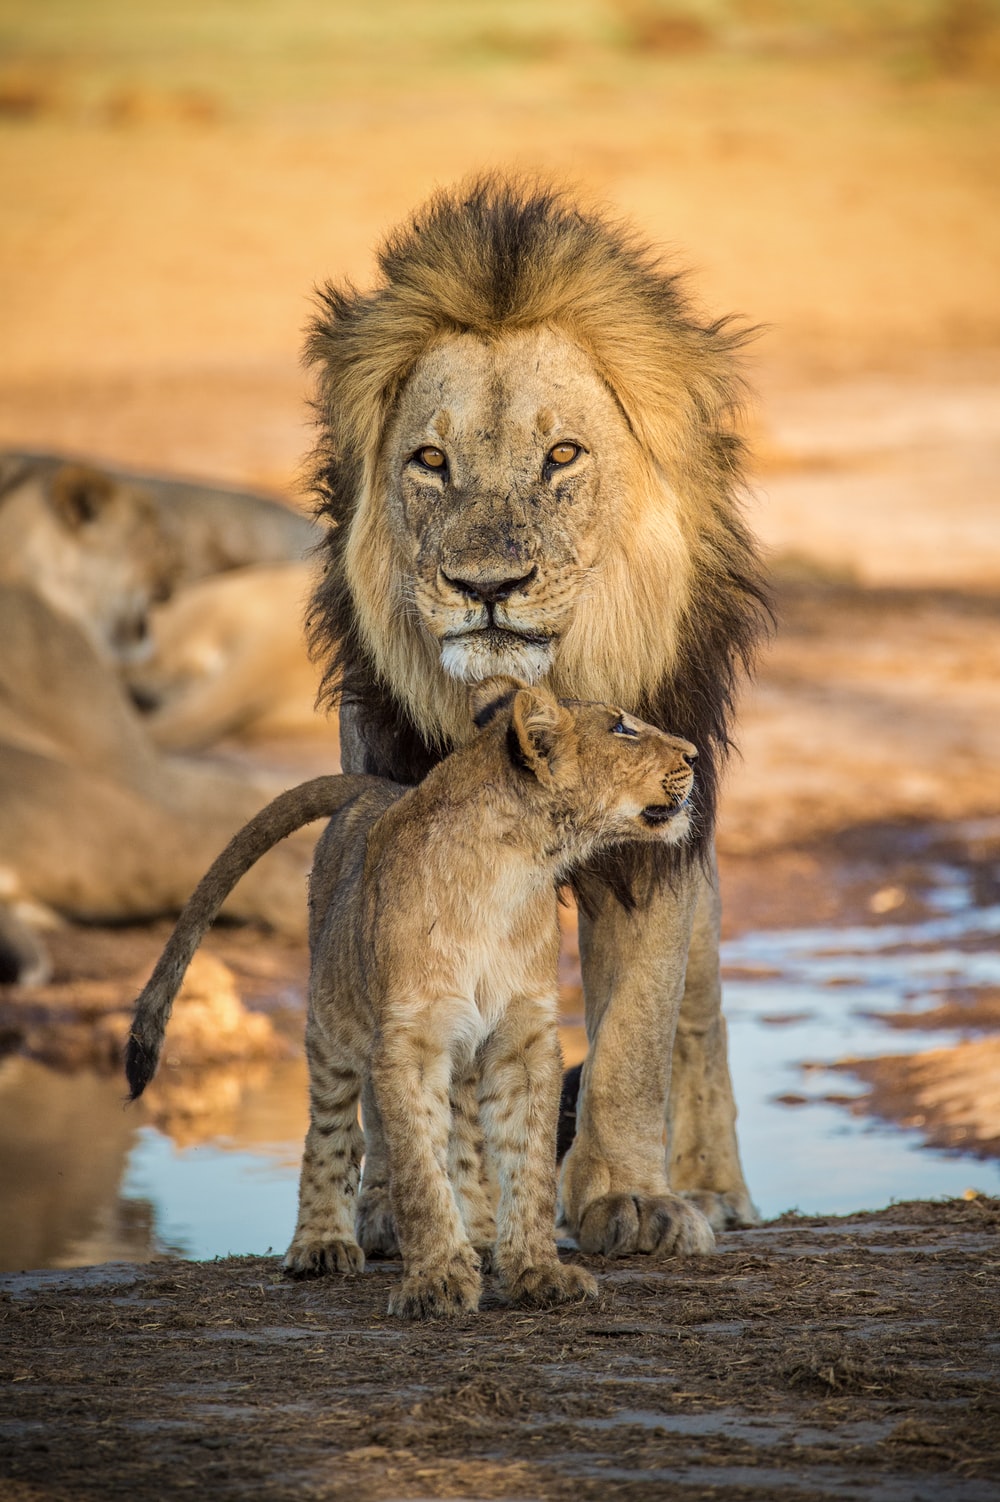 Young Lion Picture. Download Free Image